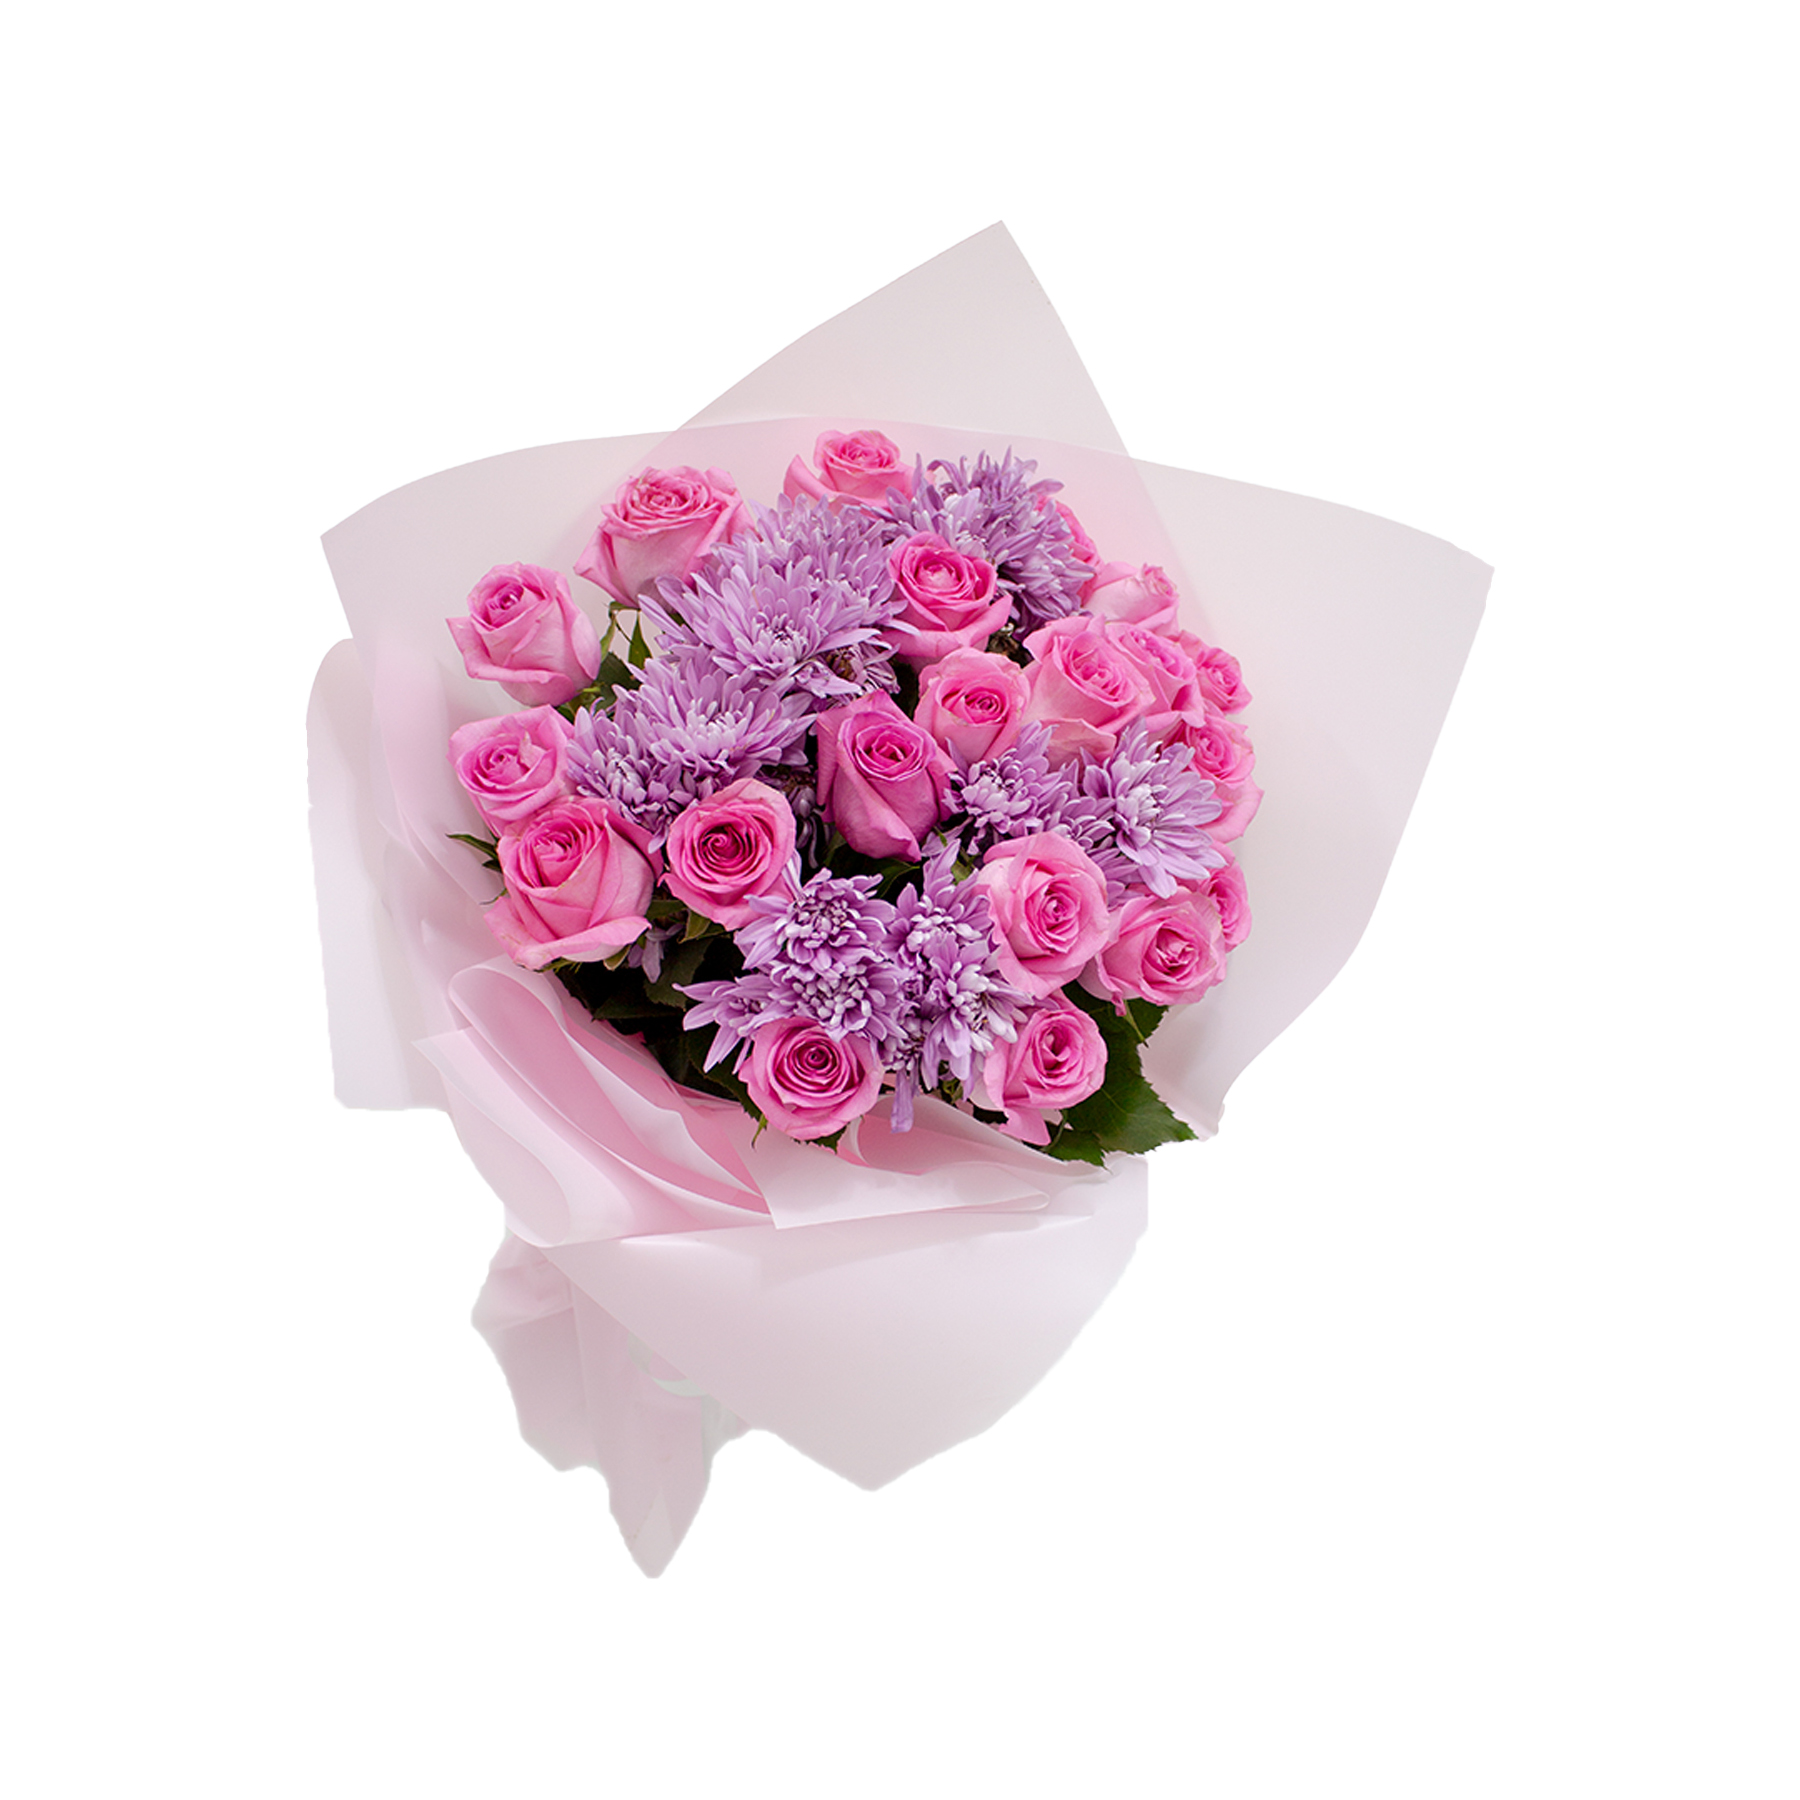 bouquet-of-pink-roses-with-purple-chrysanthemum1